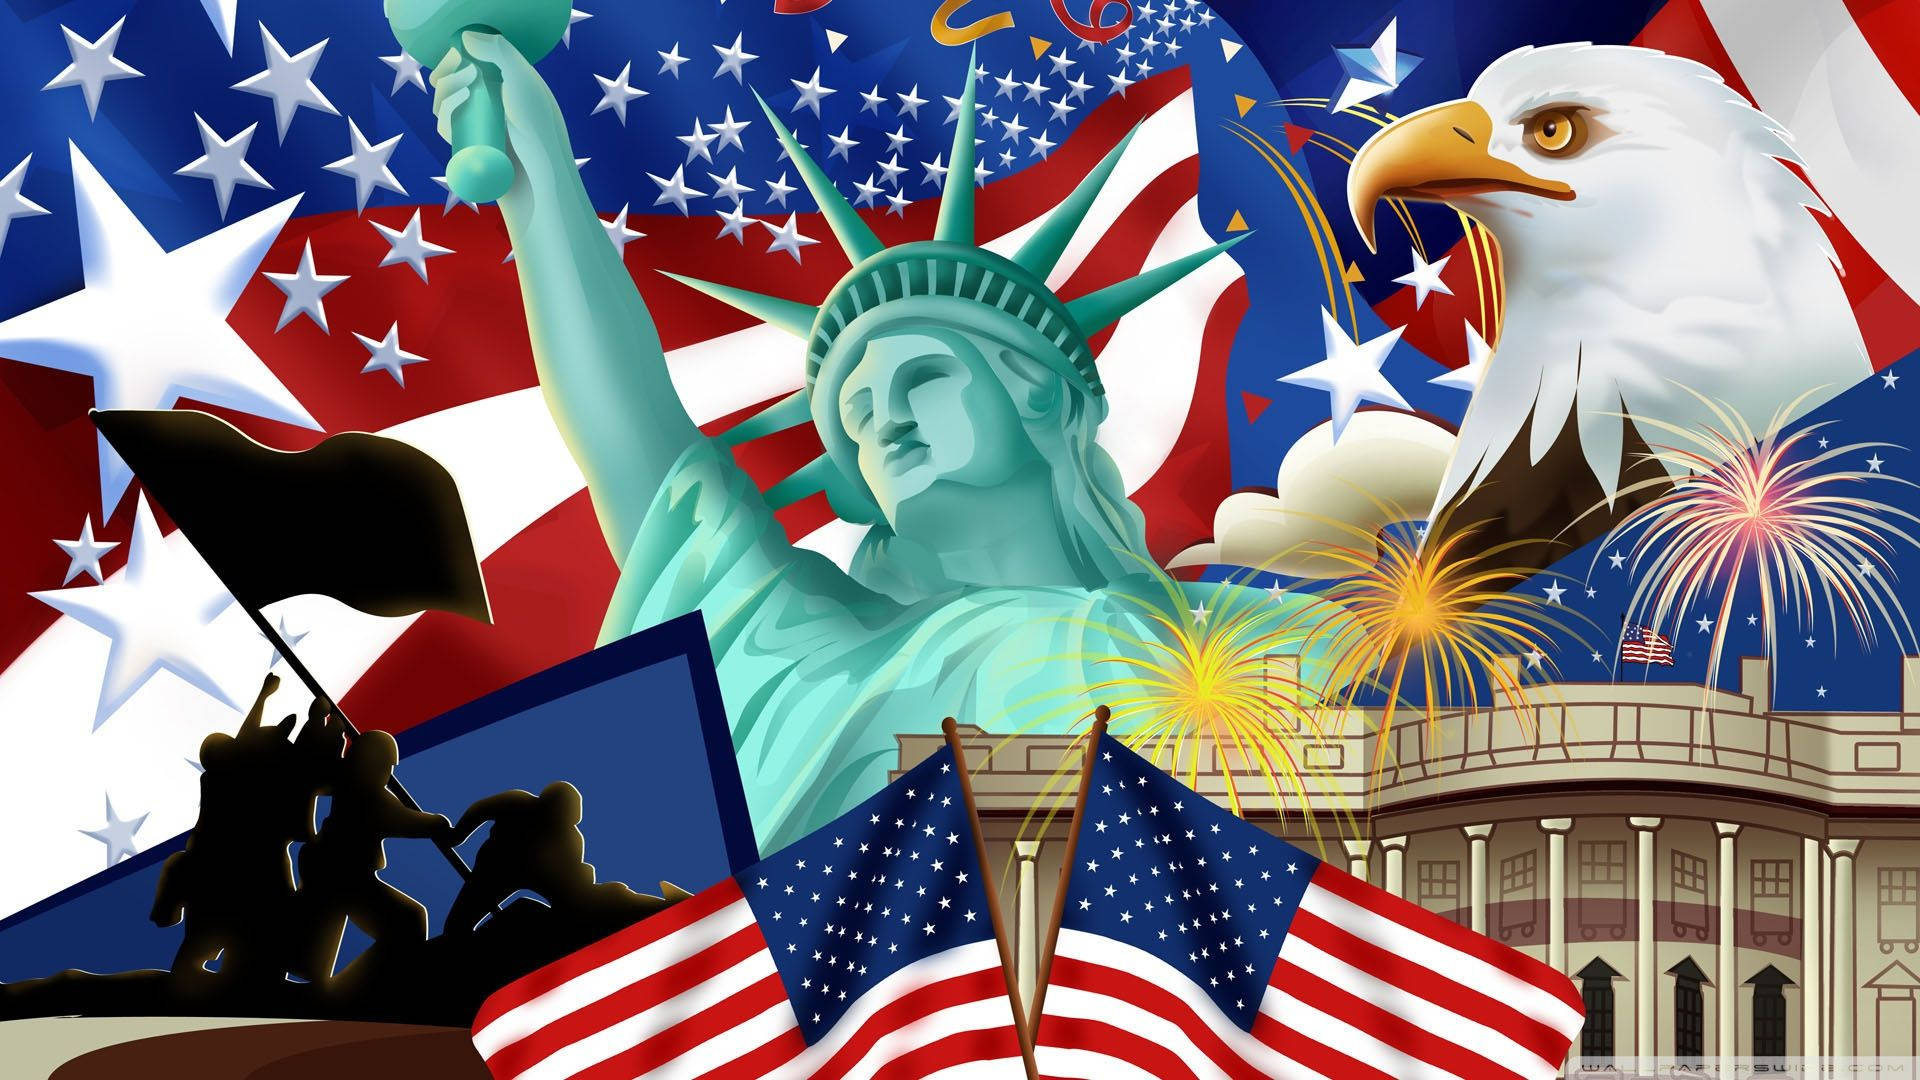 A Collage Of American Flags And Statues Background